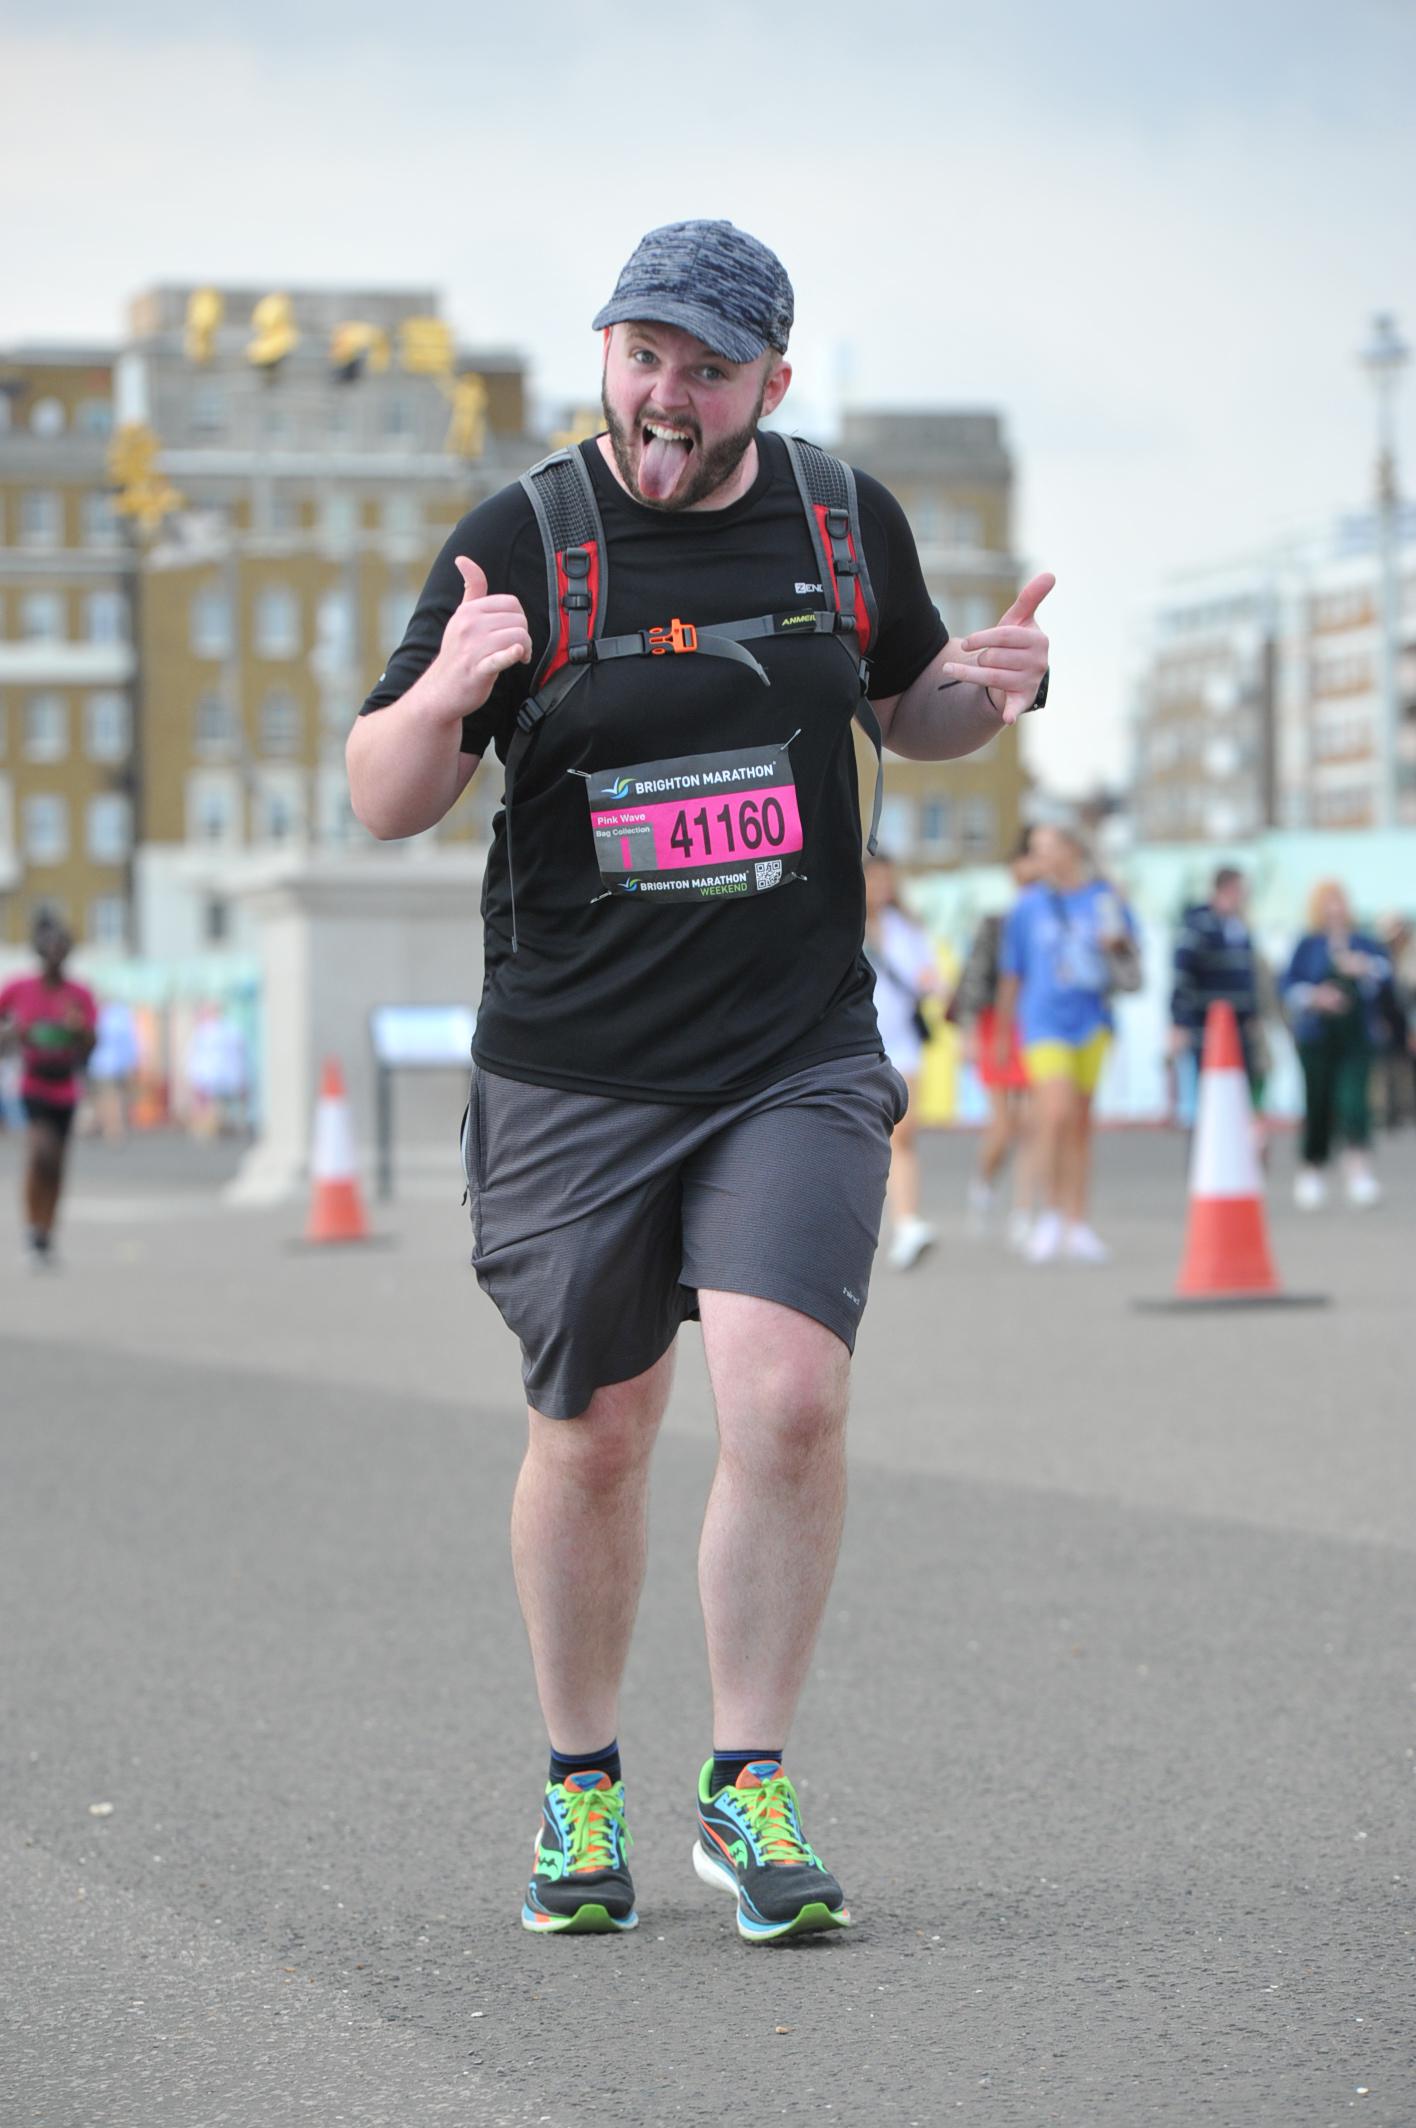 Alex, AKA The Fifa Analyst, running in the Brighton Marathon on pavement, with his thumbs up and poking his tongue out to the camera, wearing a baseball cap, grey shorts, black t-shirt and neon trainers